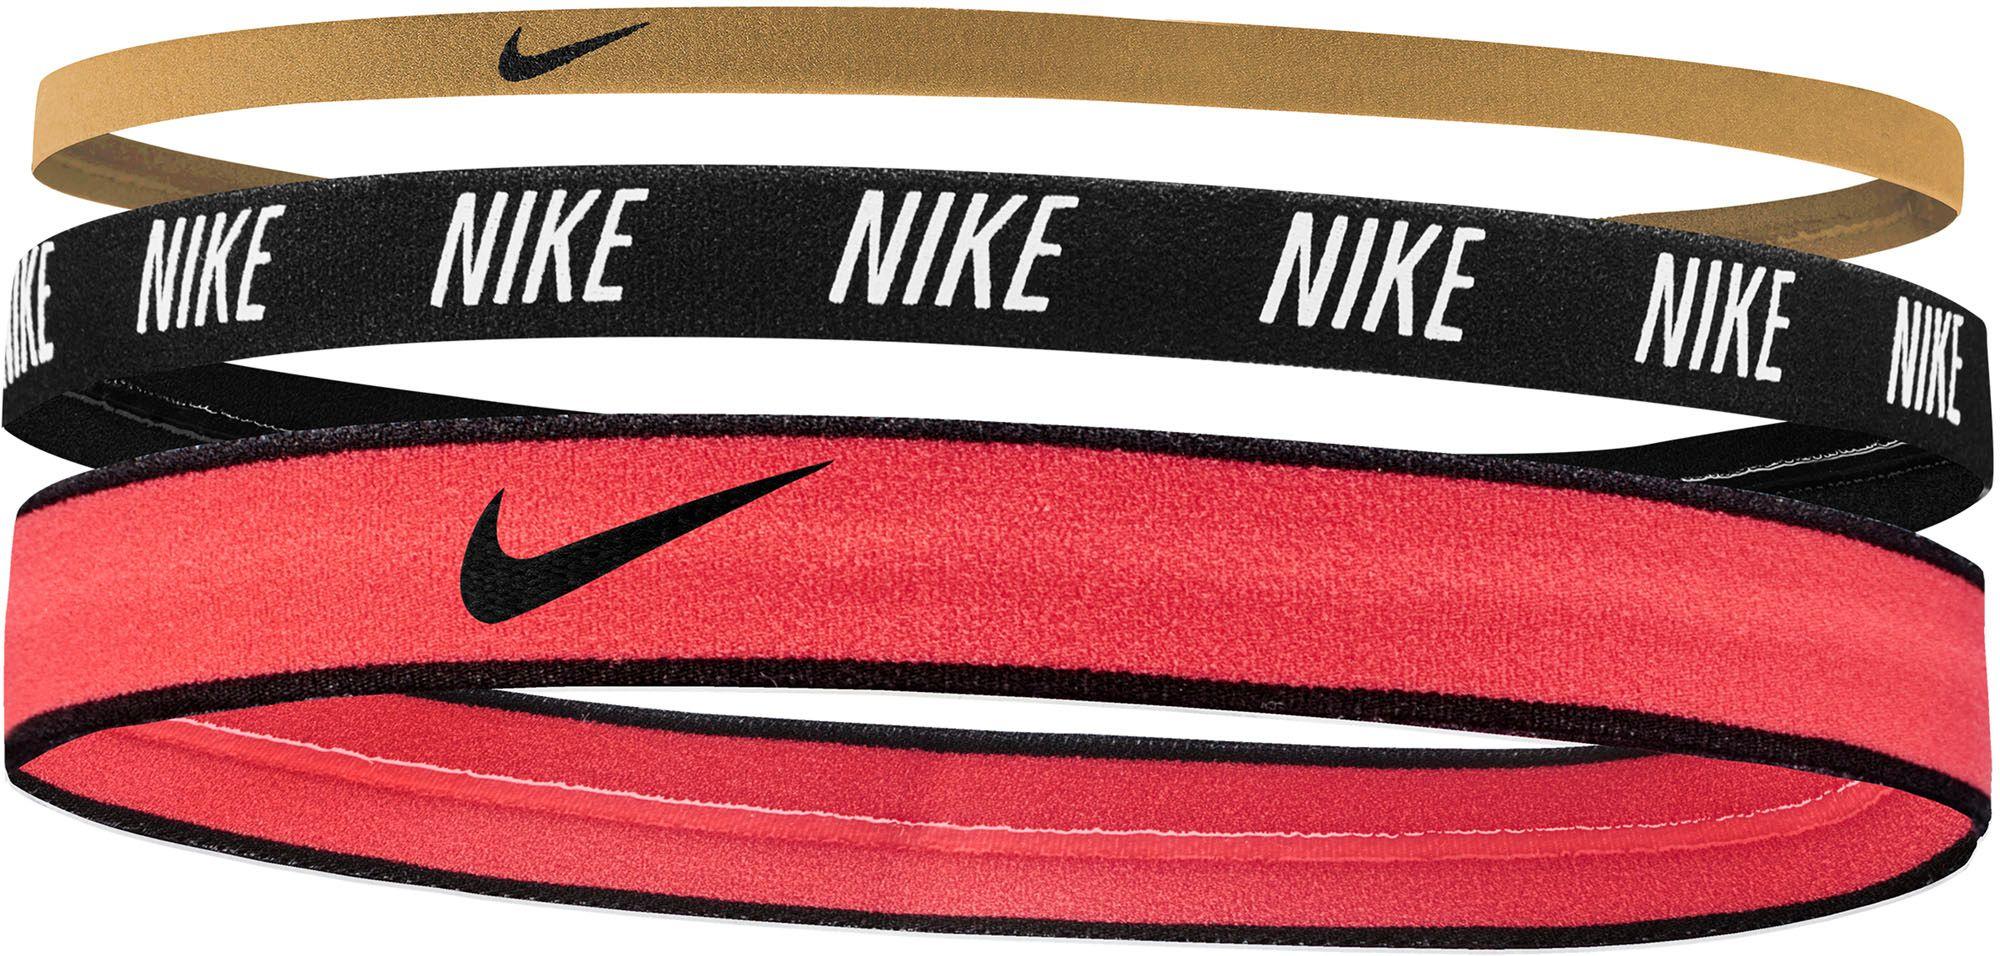 Mixed Red and Black Nike Logo - Lyst - Nike 3-pack Mixed Headbands in Black